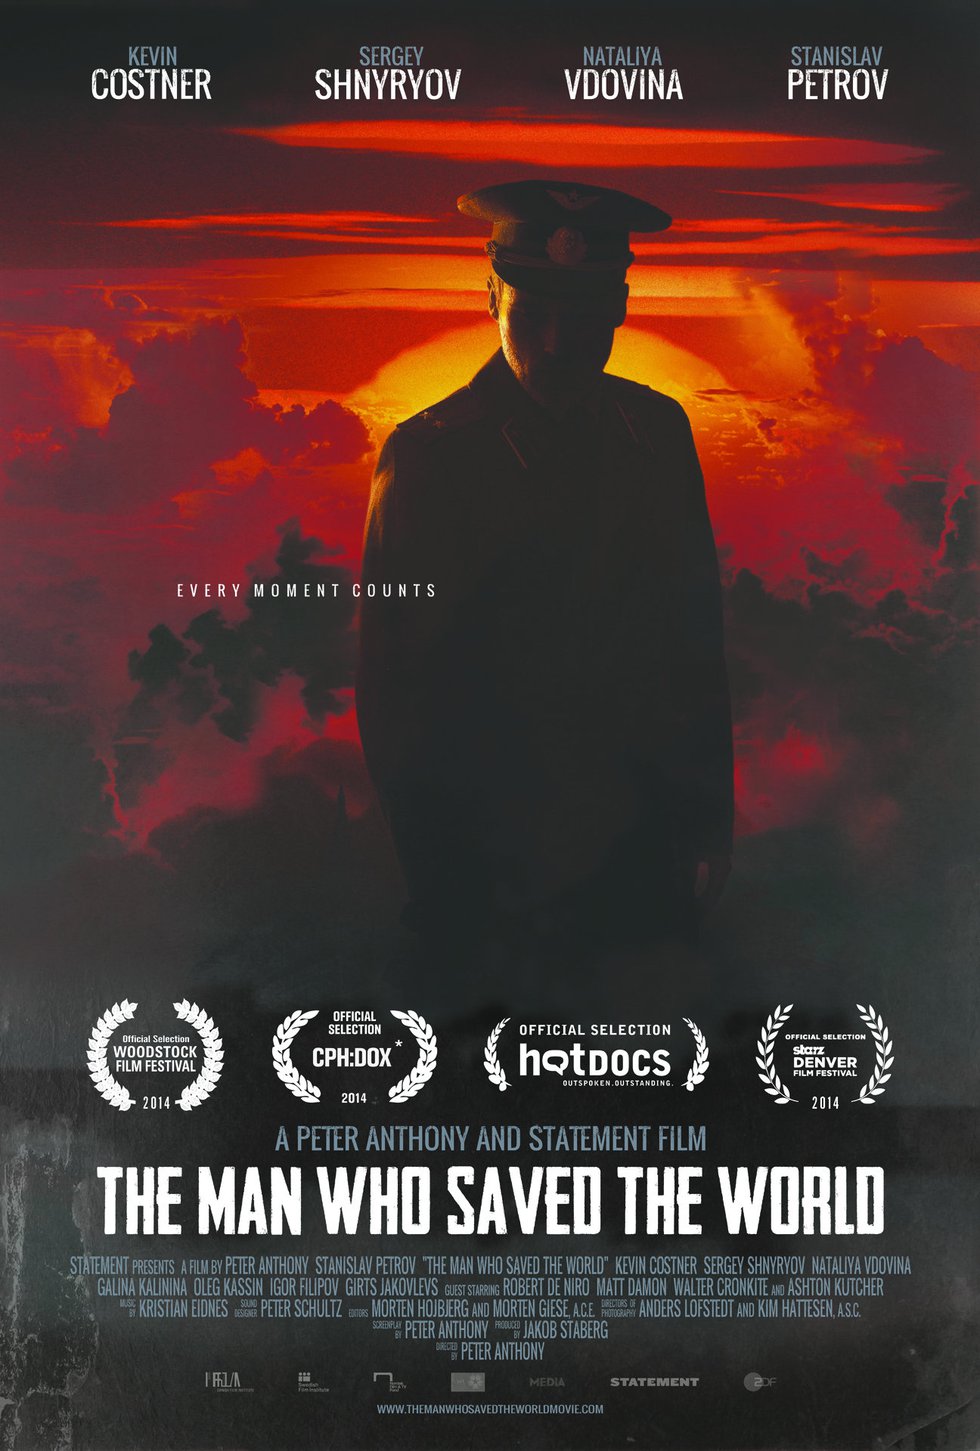 The Man Who Saved the World History Documentary